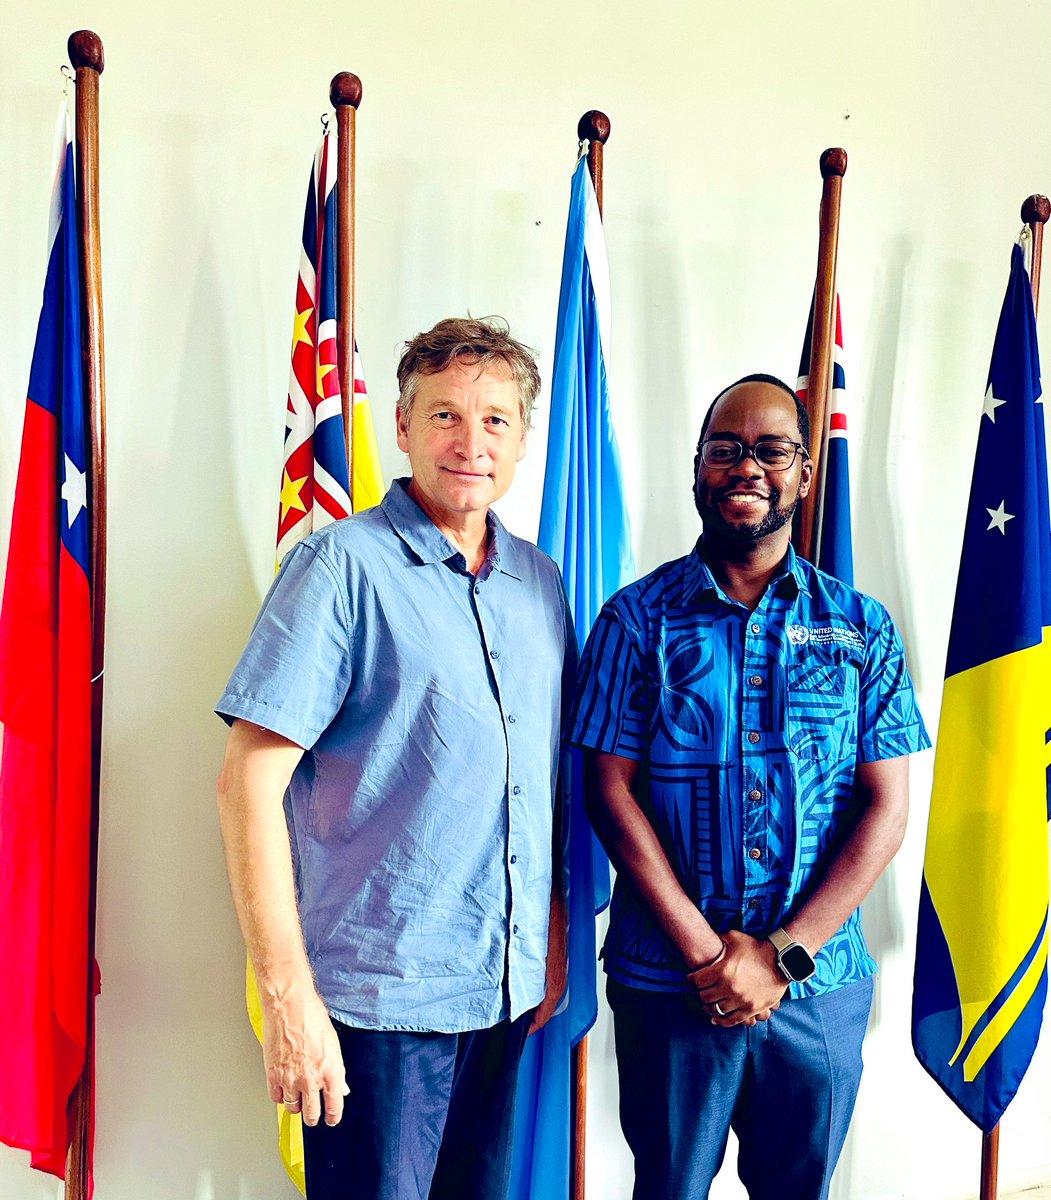 Such a pleasure to welcome to Samoa 🇼🇸 @JaapVanHierden, UN Resident Coordinator @UNinMicronesia. Had a fruitful exchange on the UN’s work in our respective UN Multi-Country Offices. Excited about our collaboration to accelerate #SDGs and support the #2050Strategy for #BluePacific